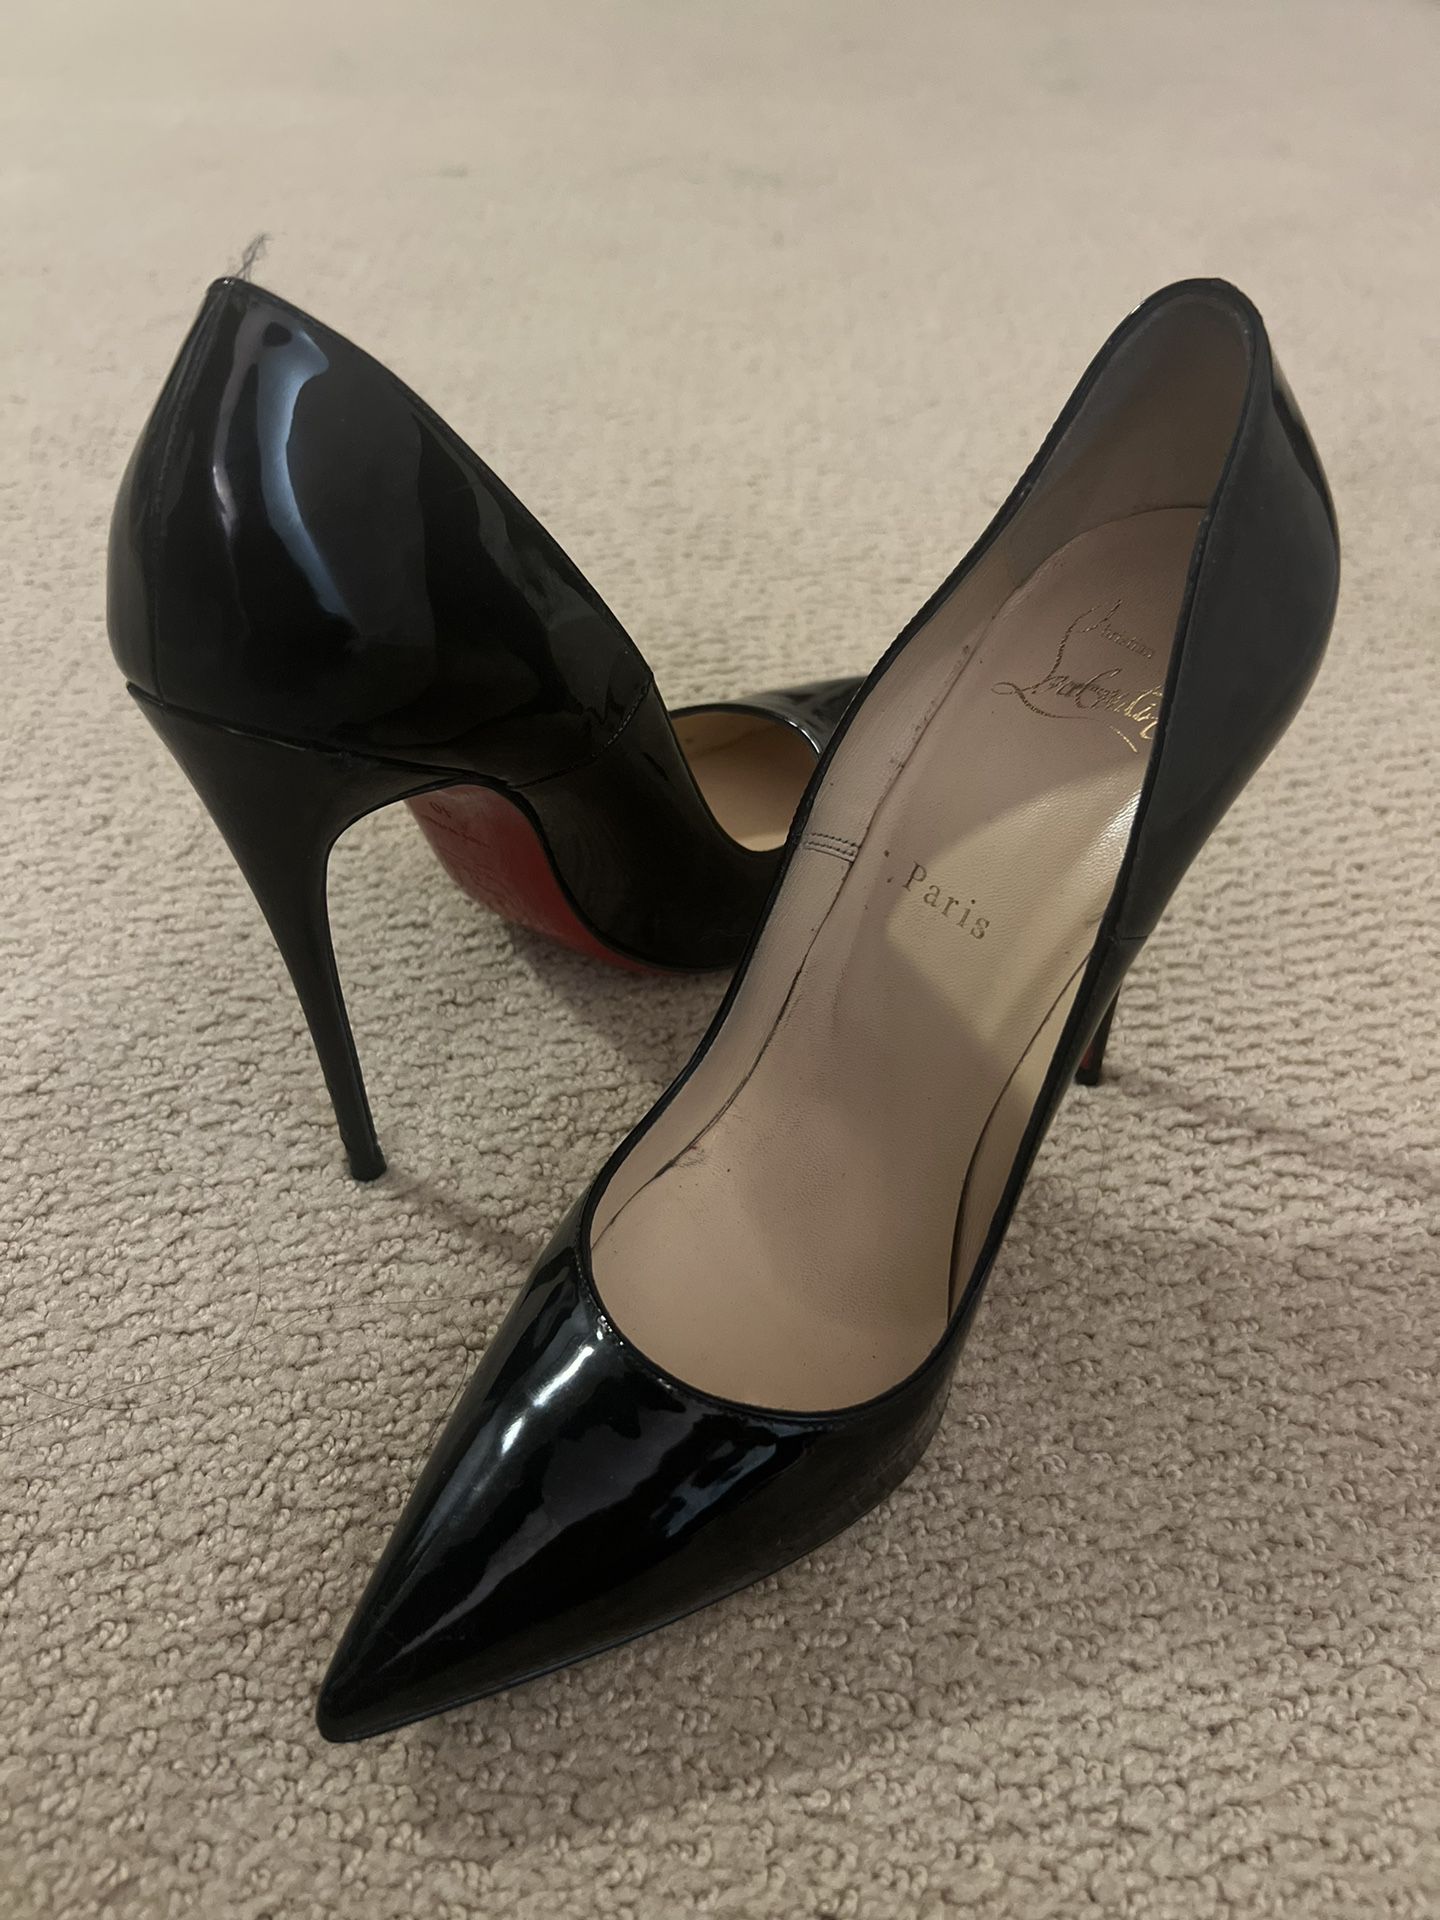 [Authentic] Christian Louboutin “So Kate” Patent Pointed-Toe Red Sole Pump